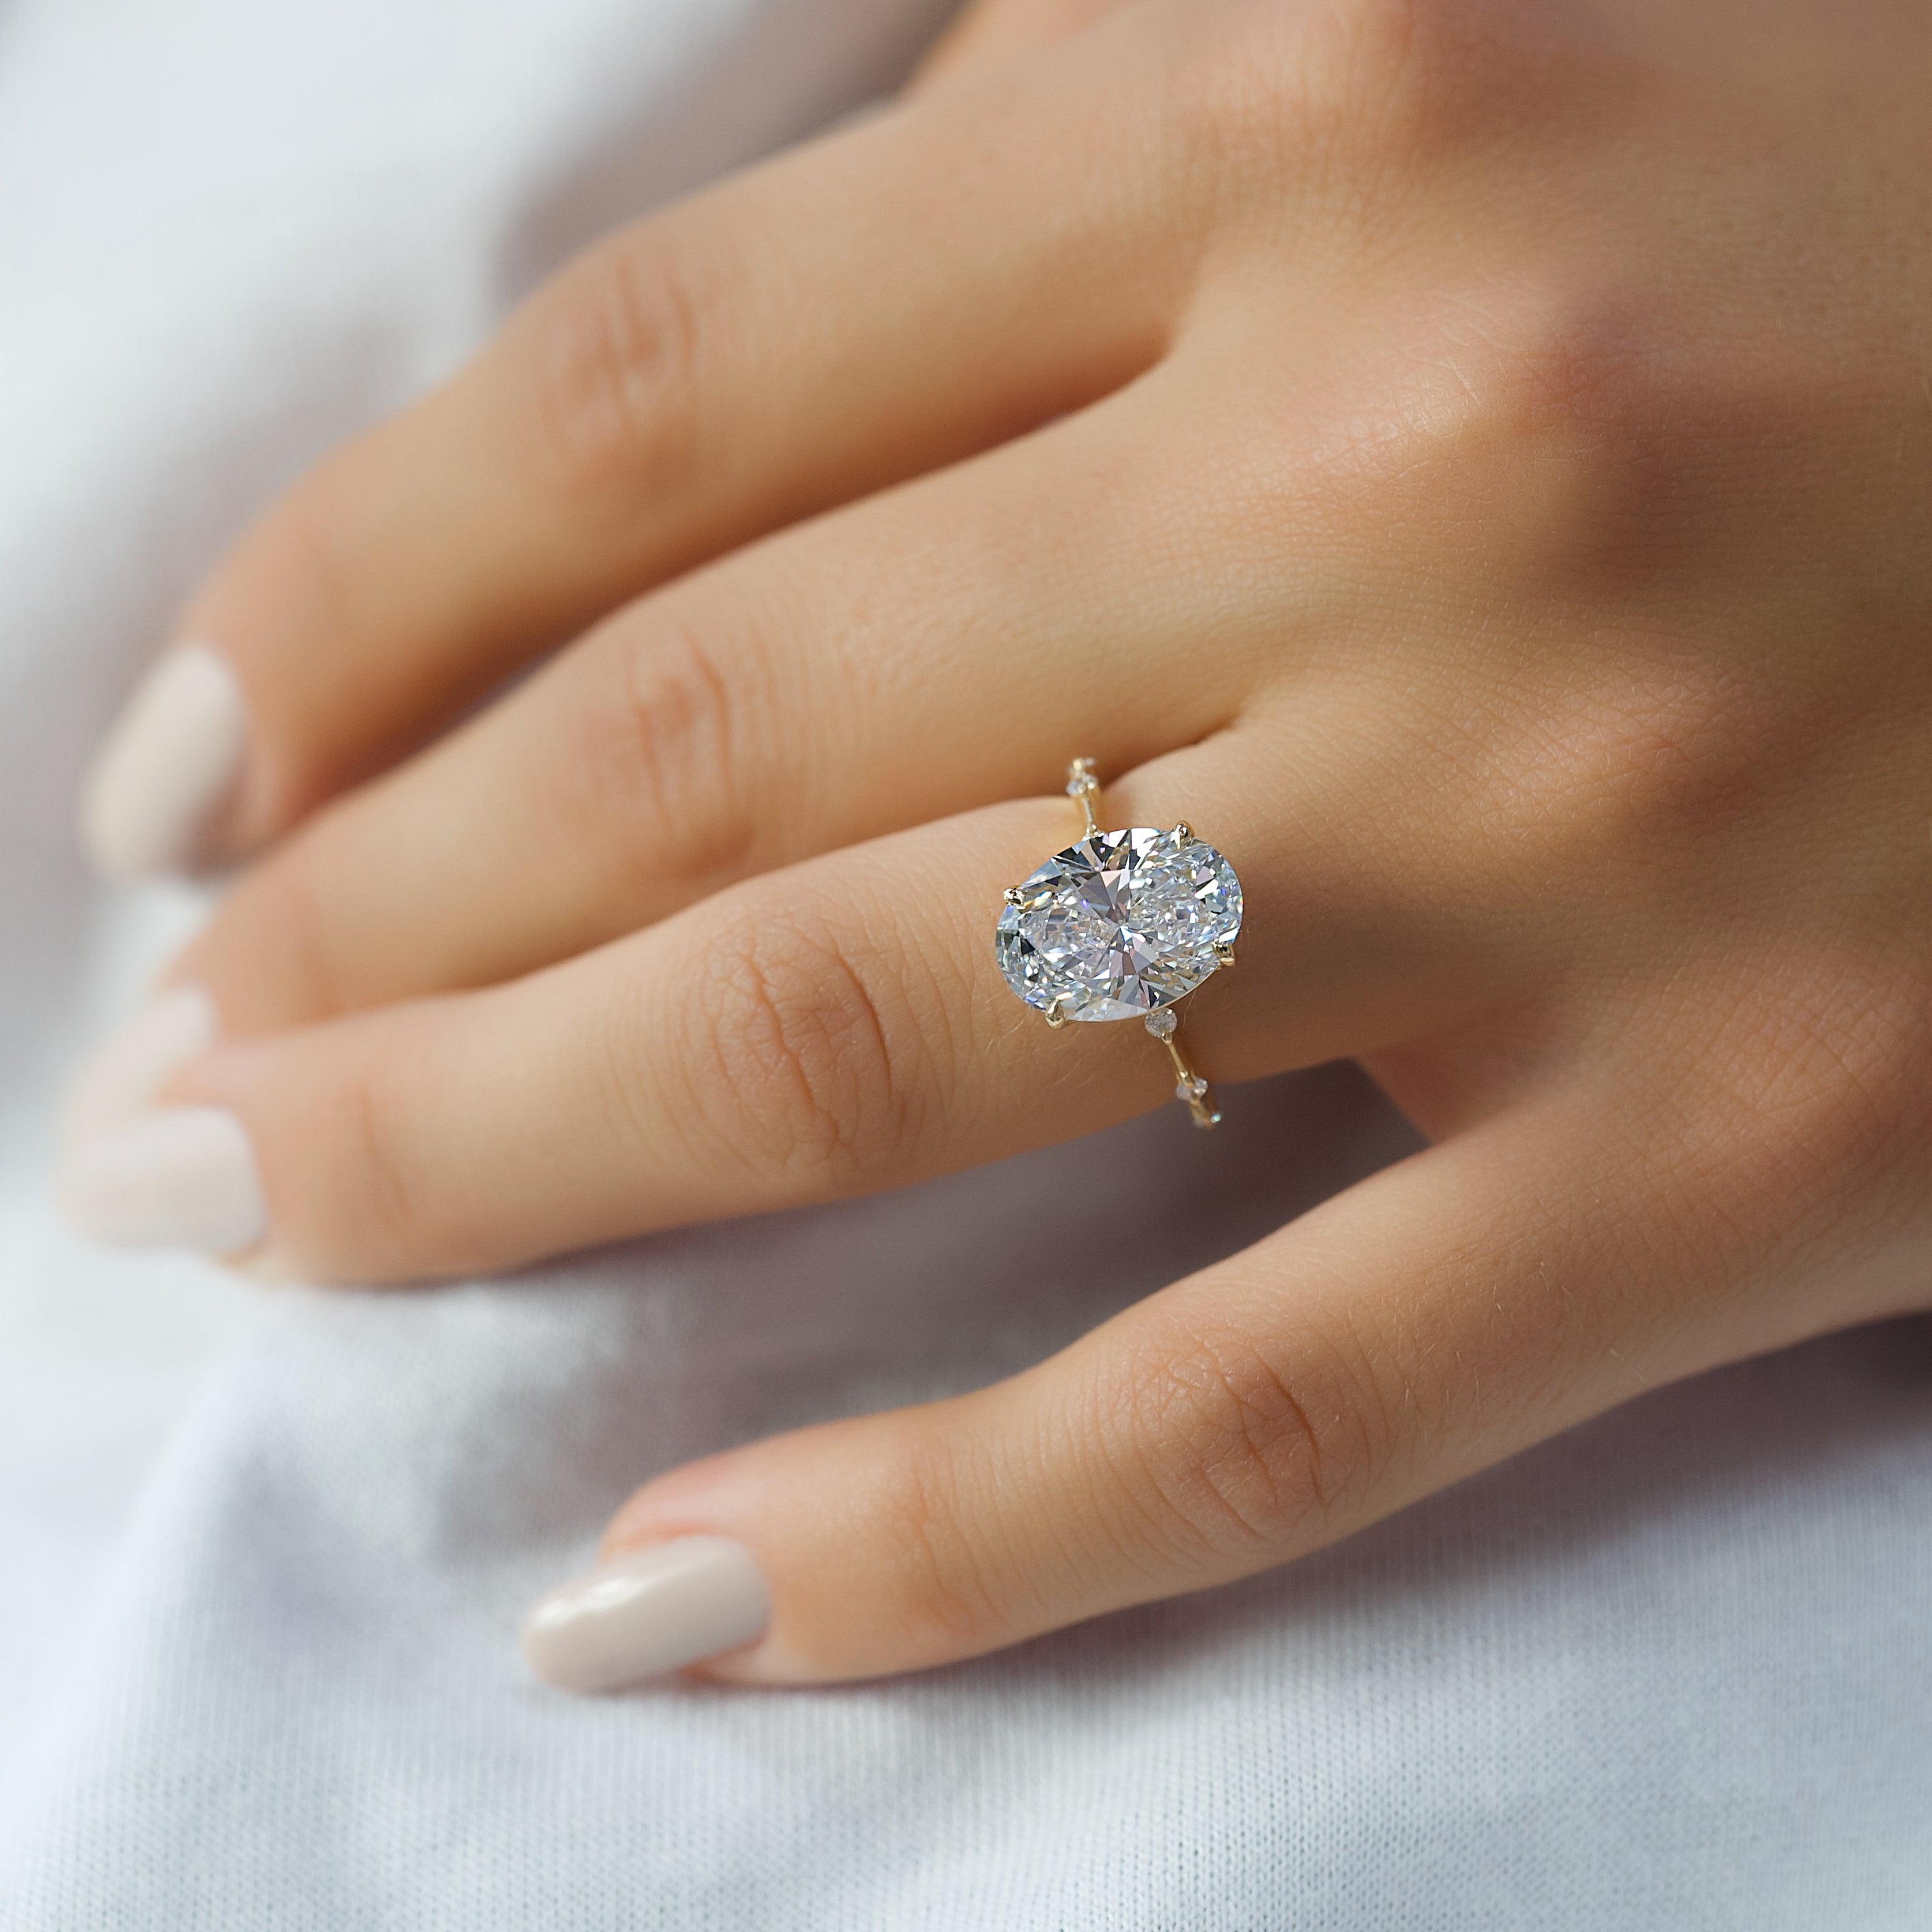 Shop for 1 carat diamond rings | Dolphin Galleries